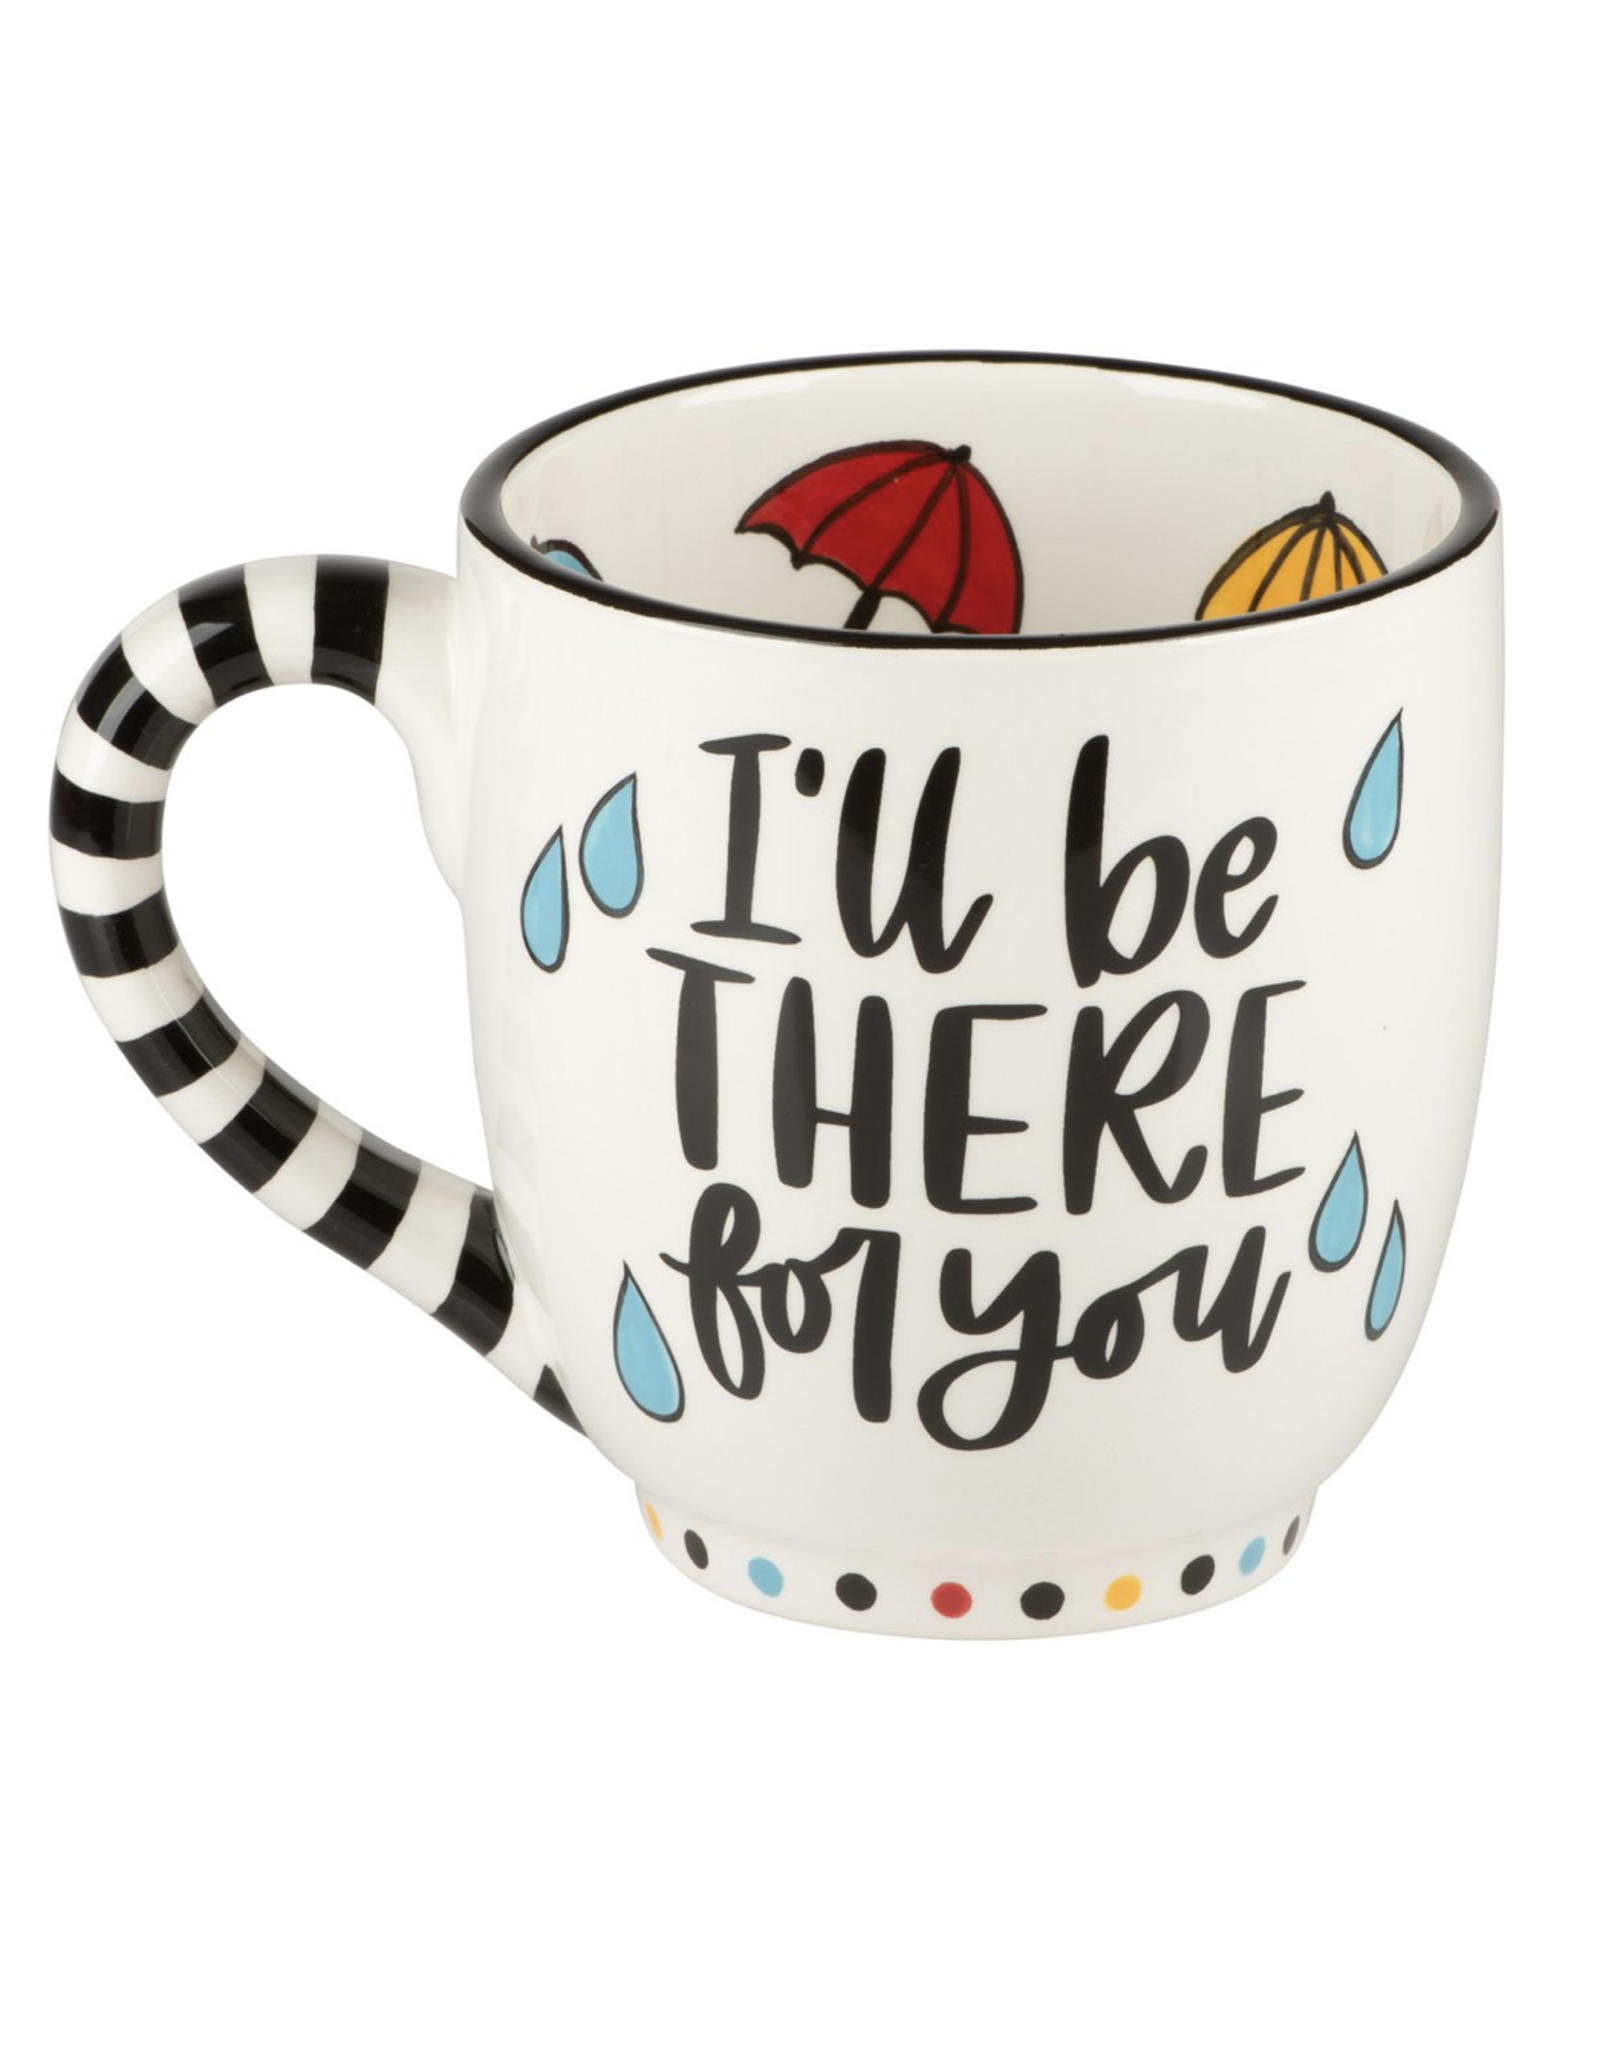 Mug I'll Be There For You